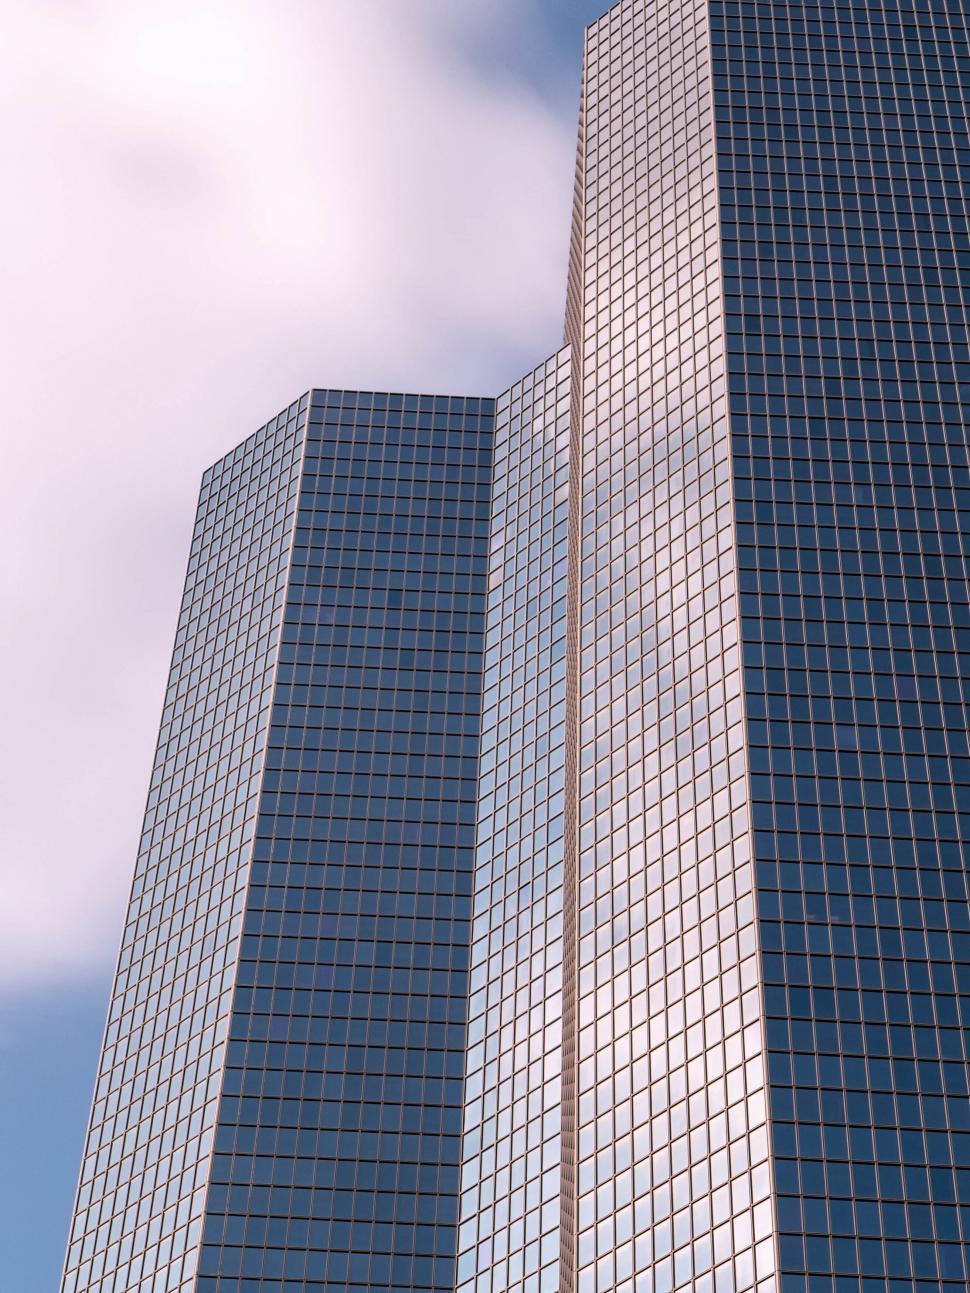 Free Image of Skyscrapers reaching towards the sky with glass facades 